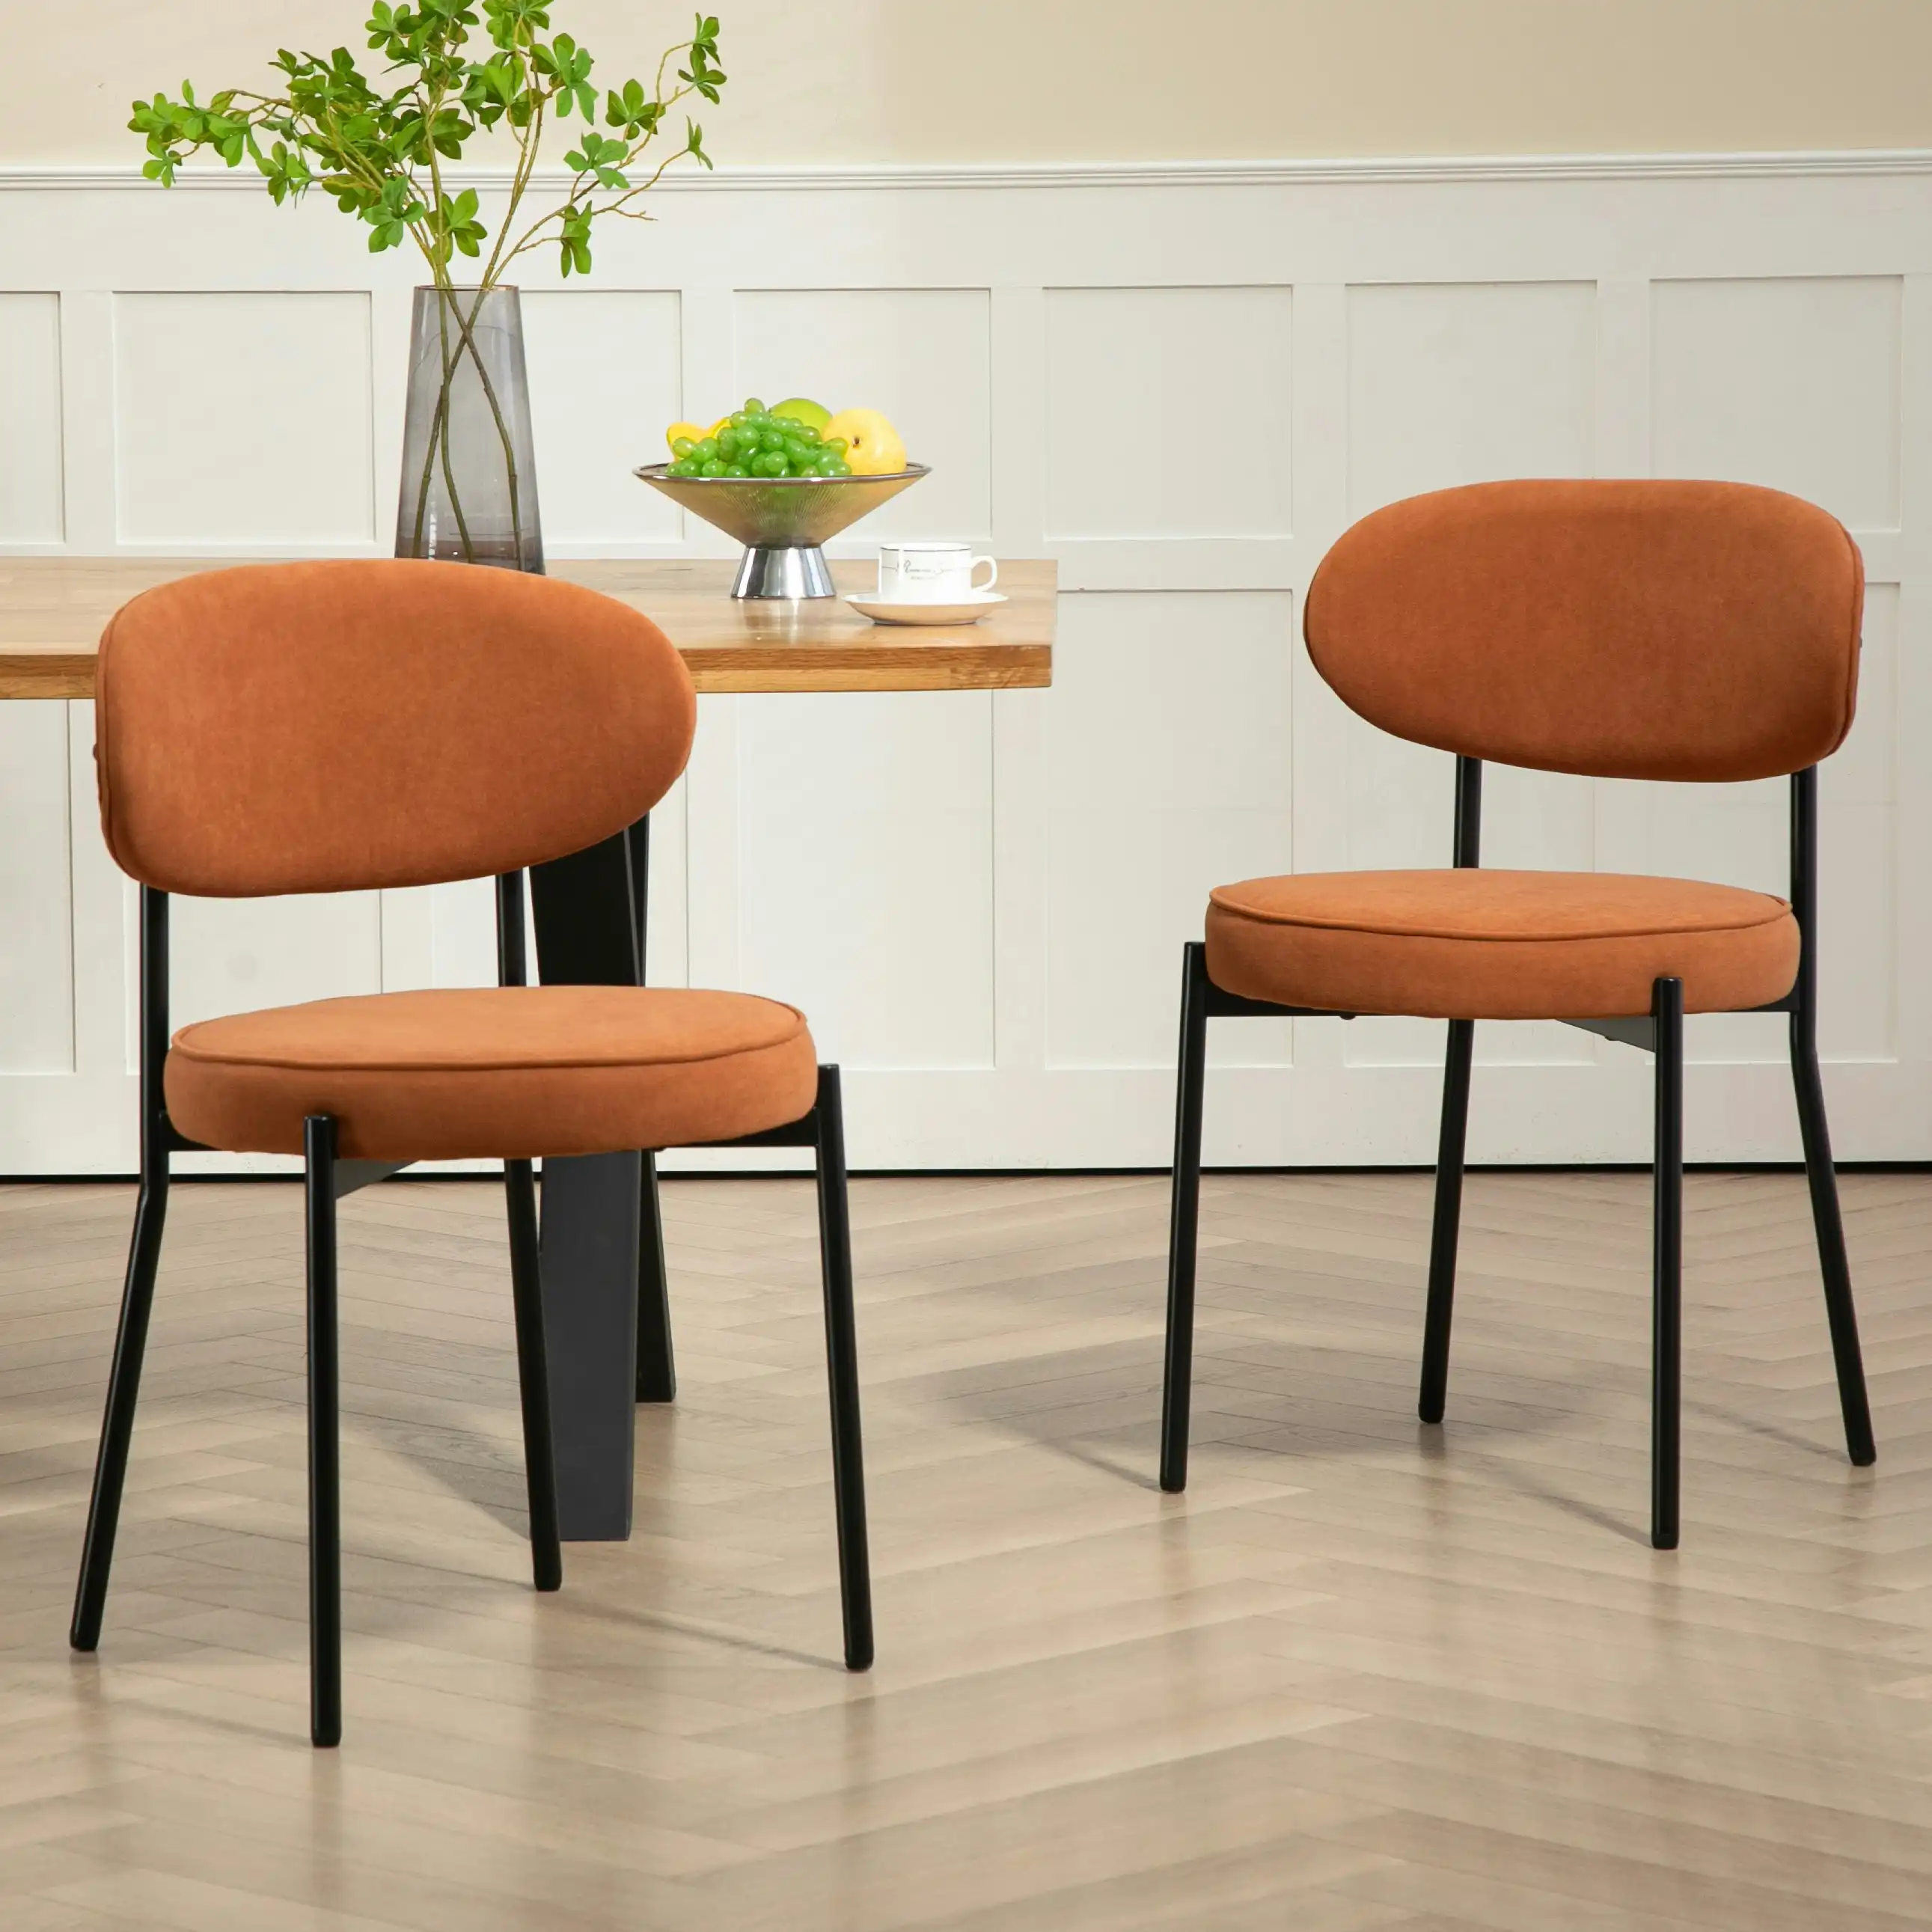 IHOMDEC Mid-Century Round Upholstered Dining Chair with Metal Frame and Legs Set of 2 Rust Orange